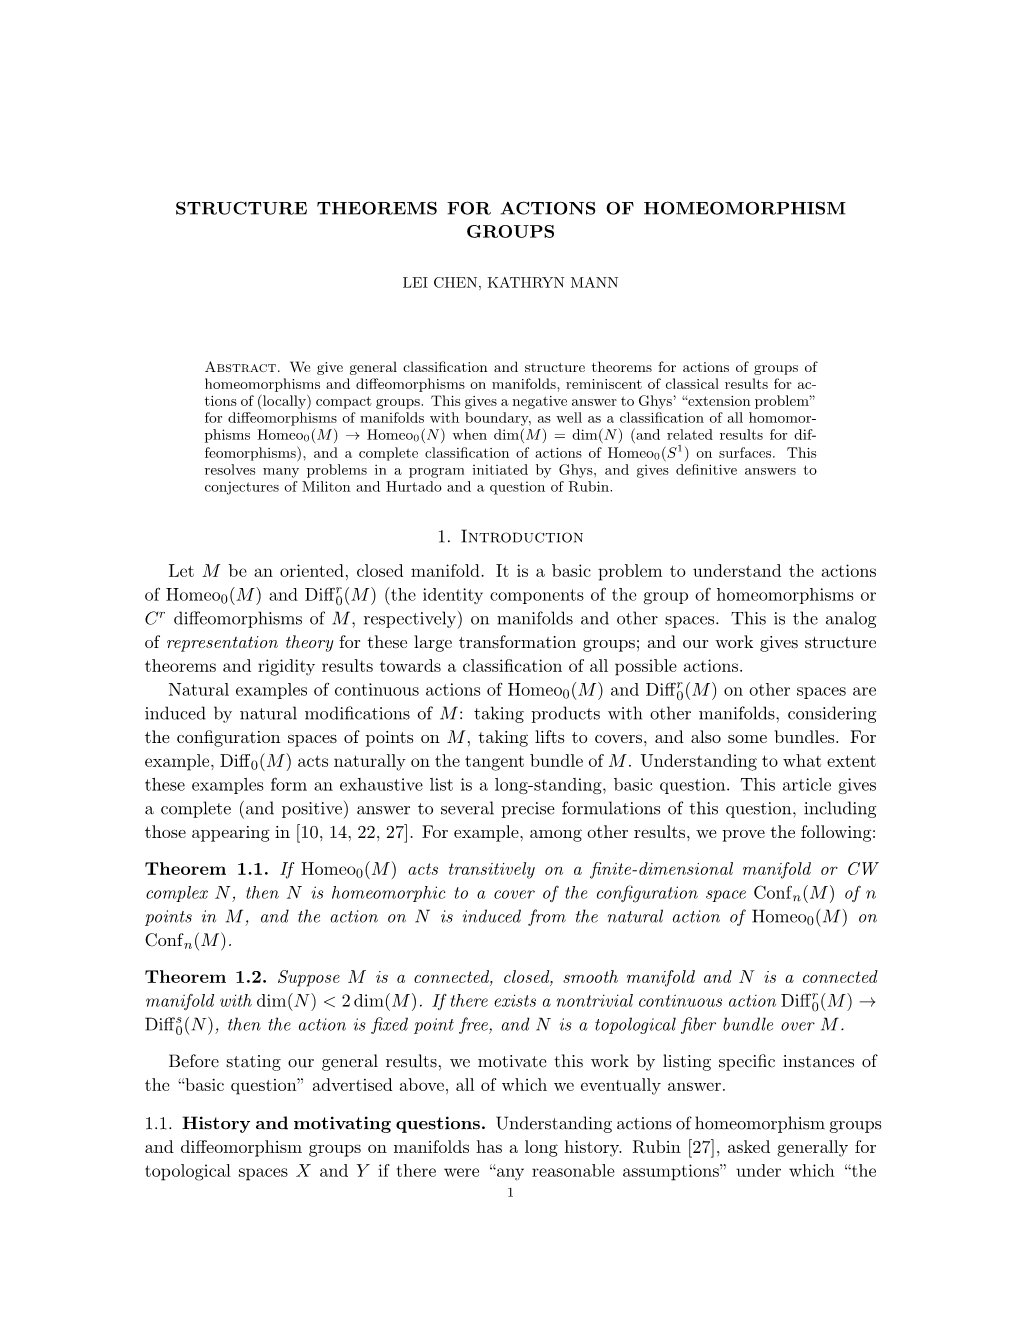 Structure Theorems for Actions of Homeomorphism Groups